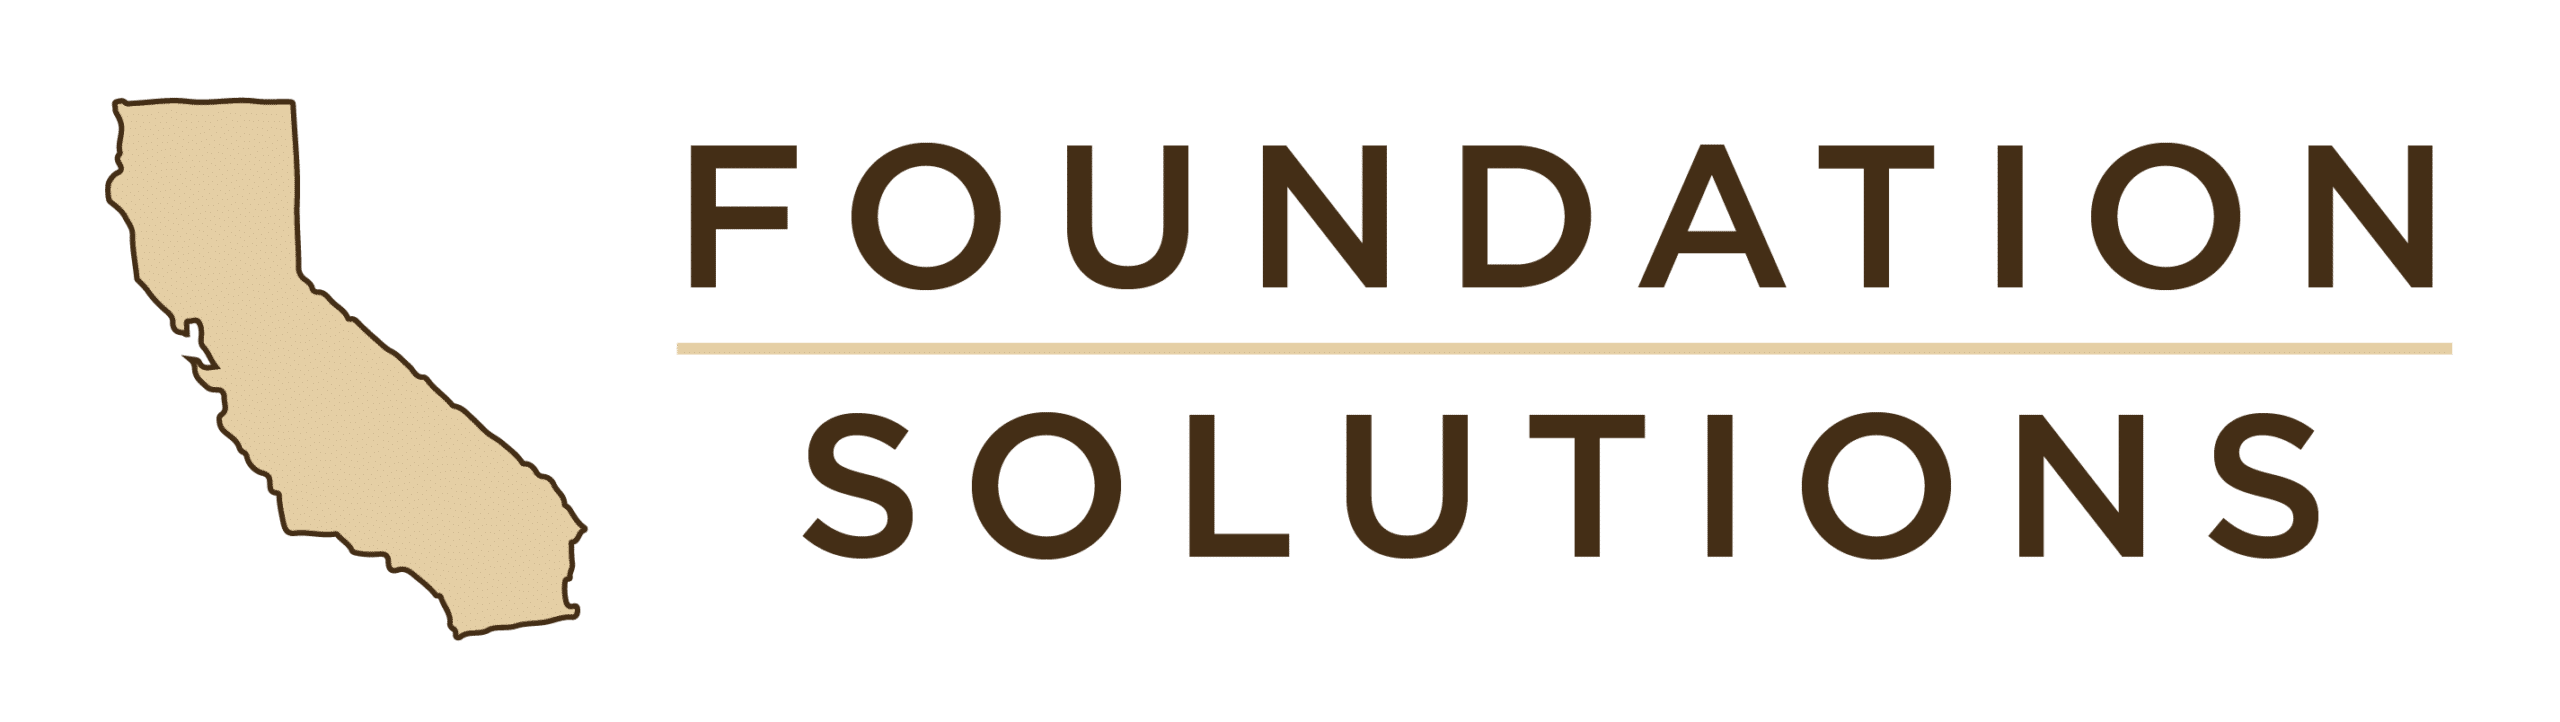 FOUNDATION SOLUTIONS